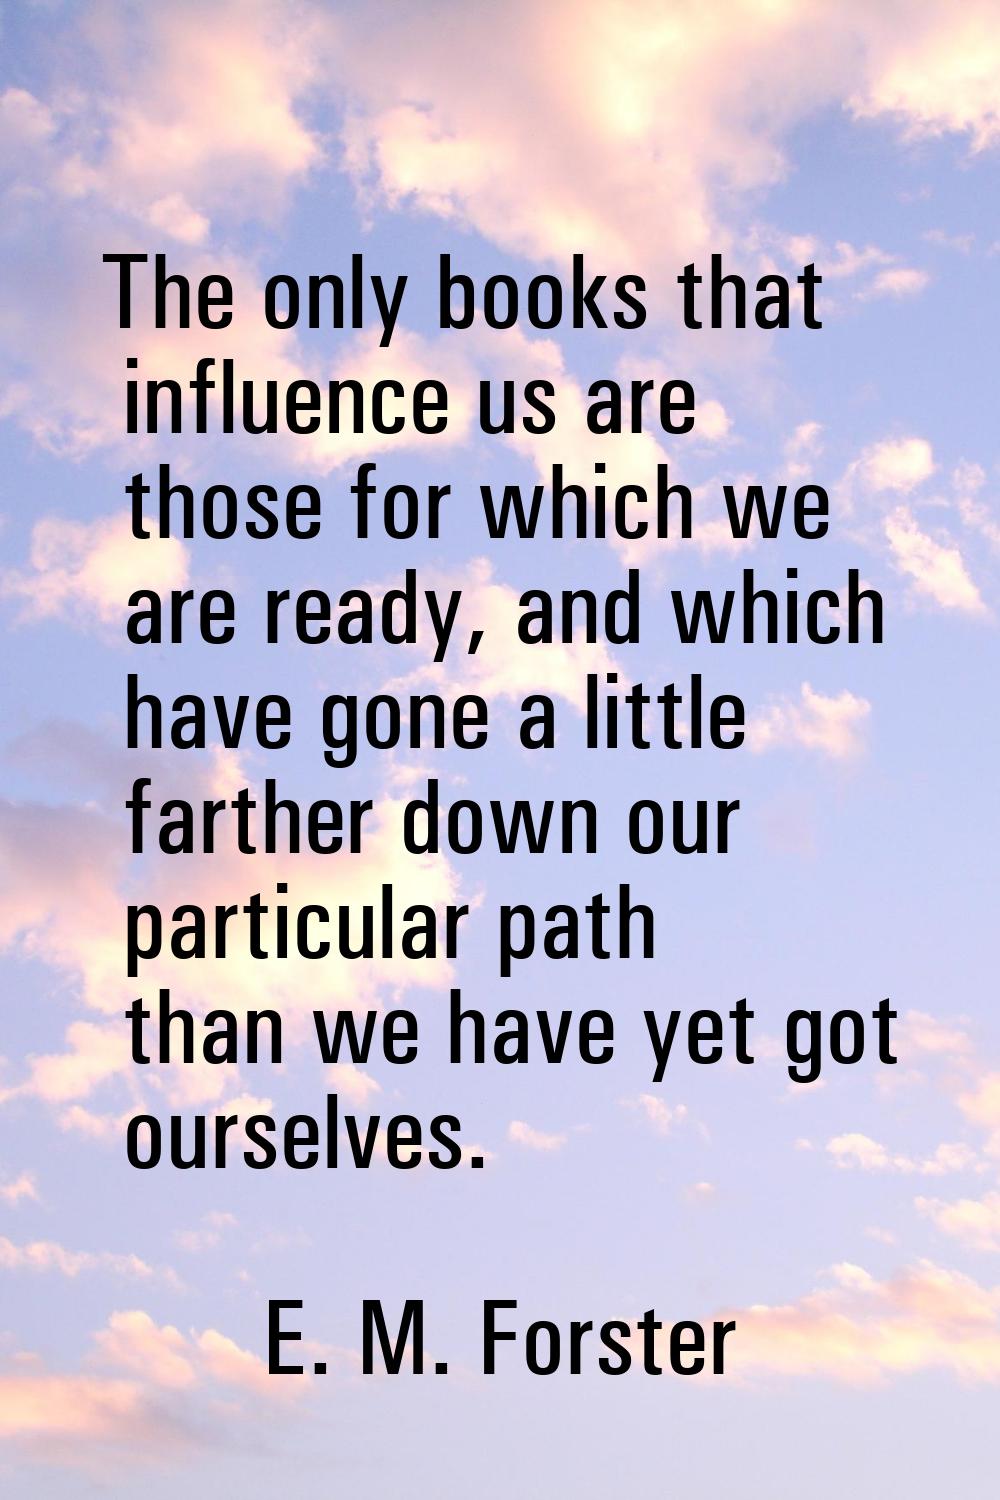 The only books that influence us are those for which we are ready, and which have gone a little far